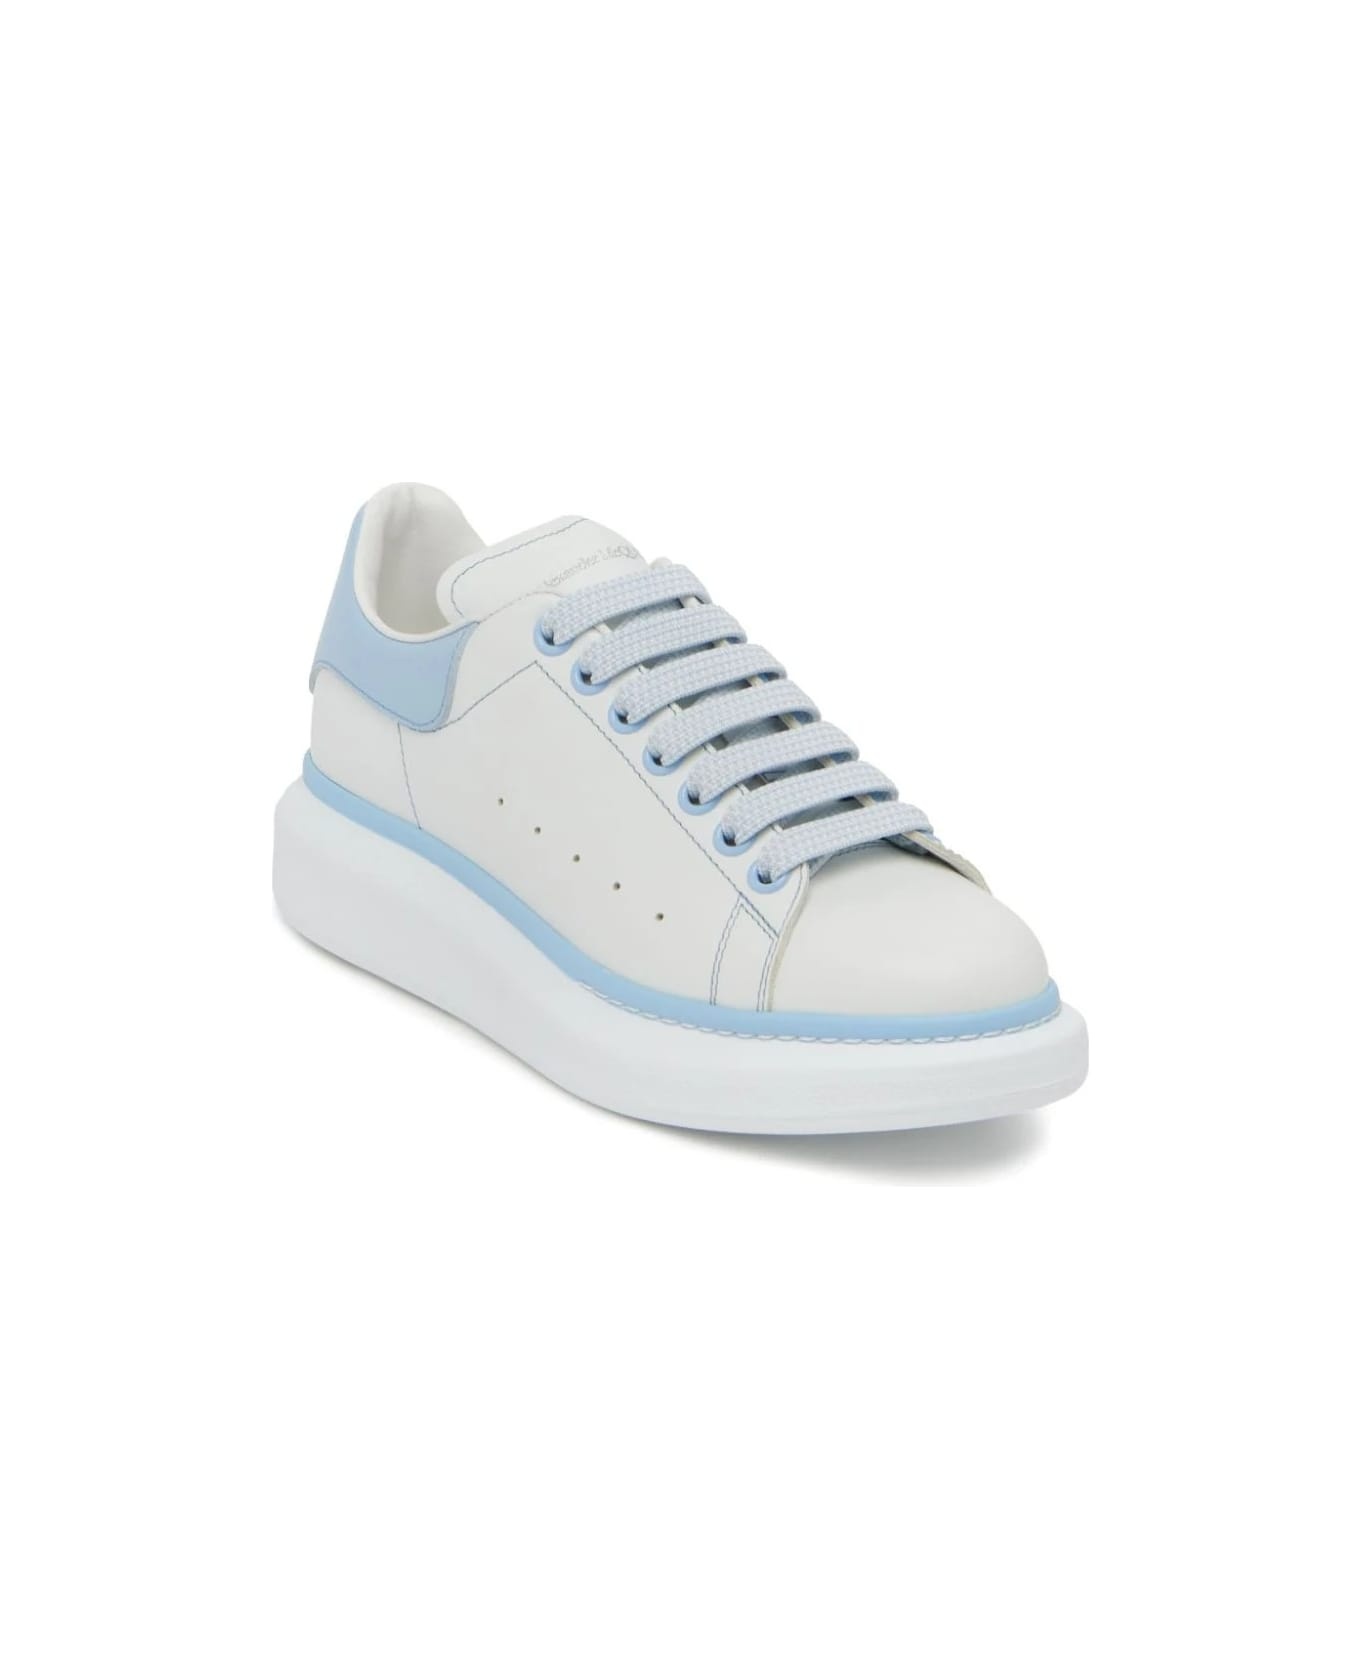 White Oversized Sneakers With Powder Blue Details - 2